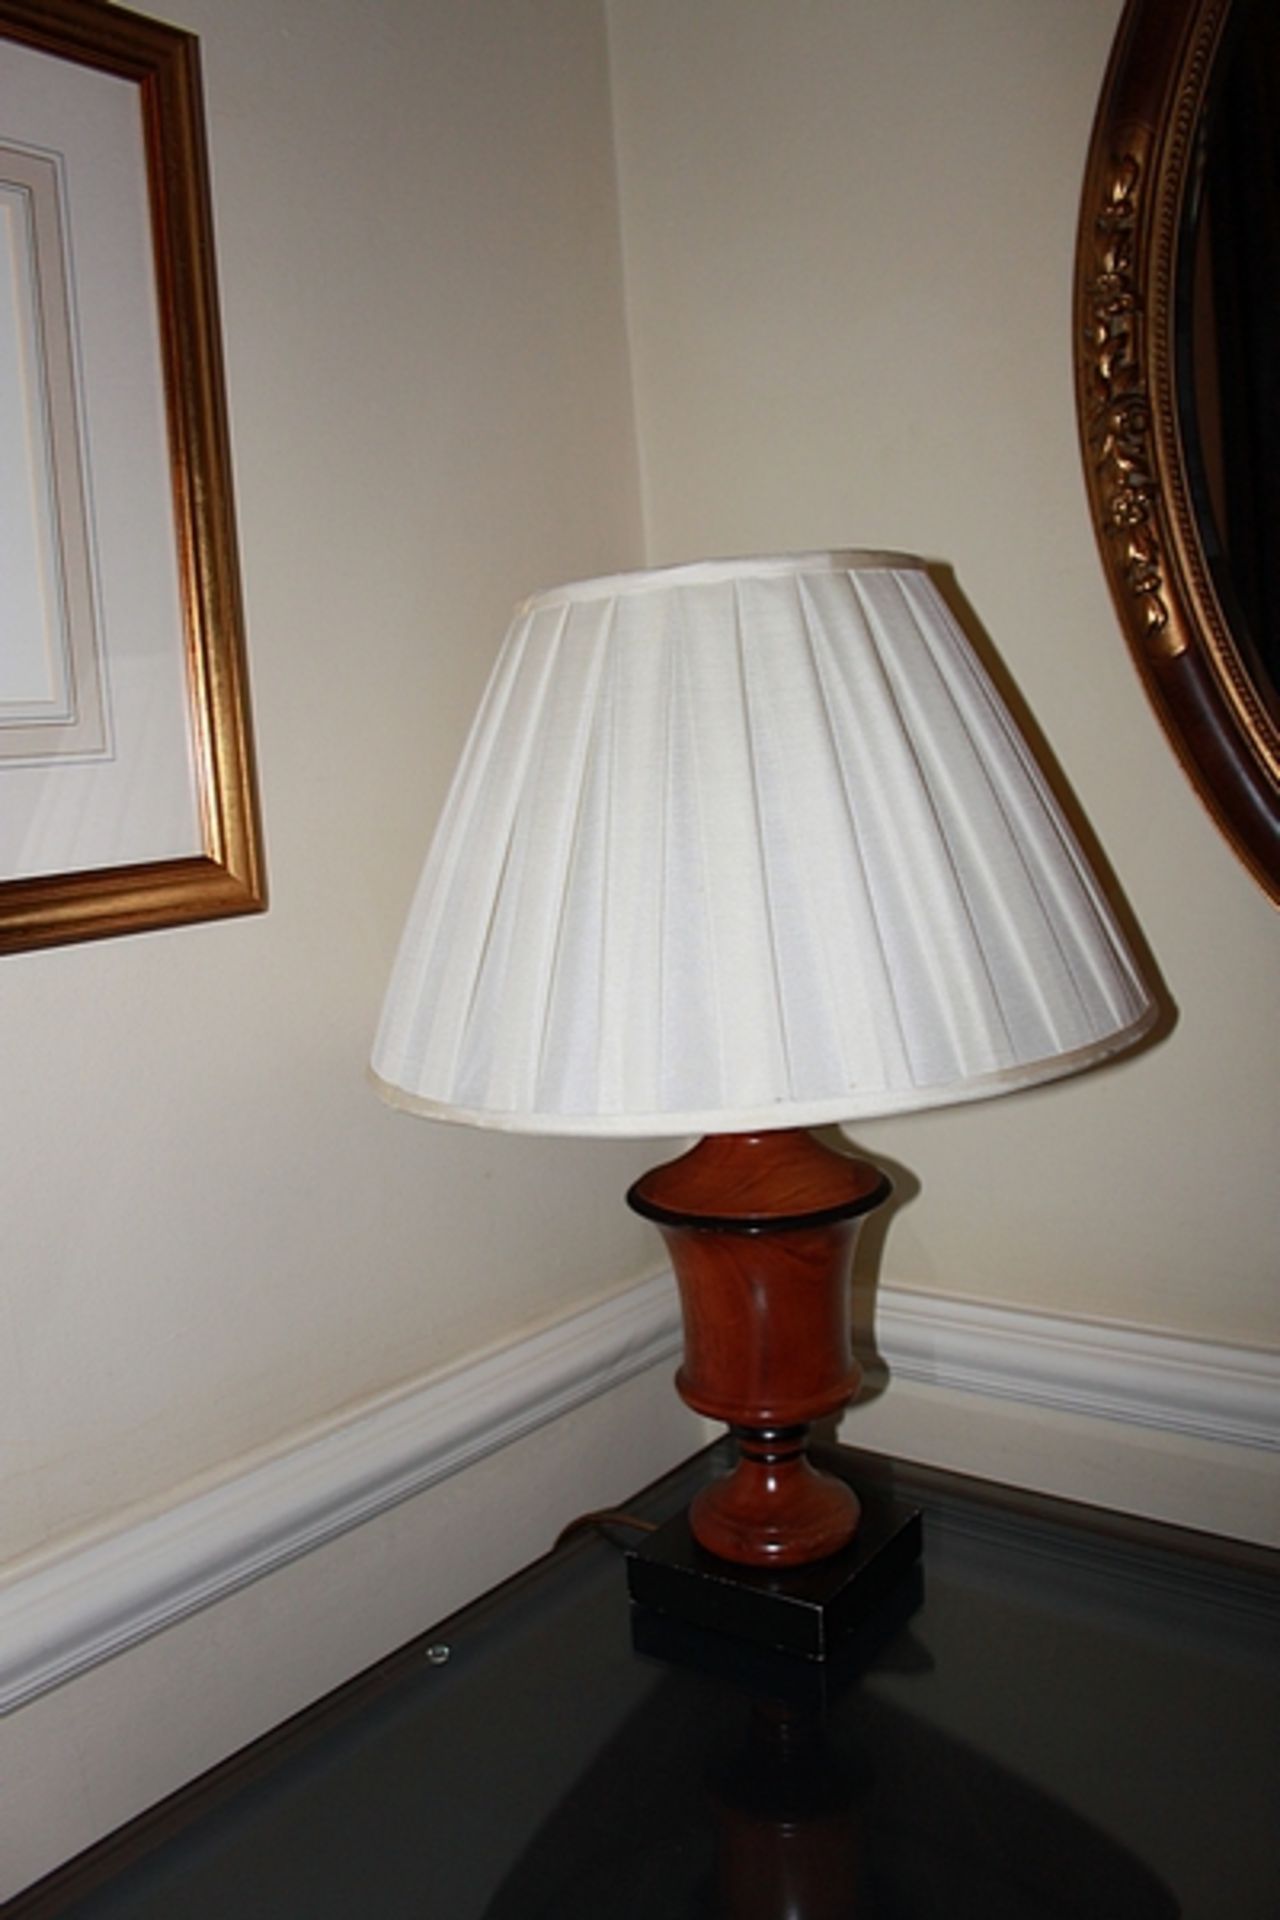 3 x lamps - 2 x Cornithian style pillar lamps and 1 x urn shaped polished table lamp - Image 2 of 2